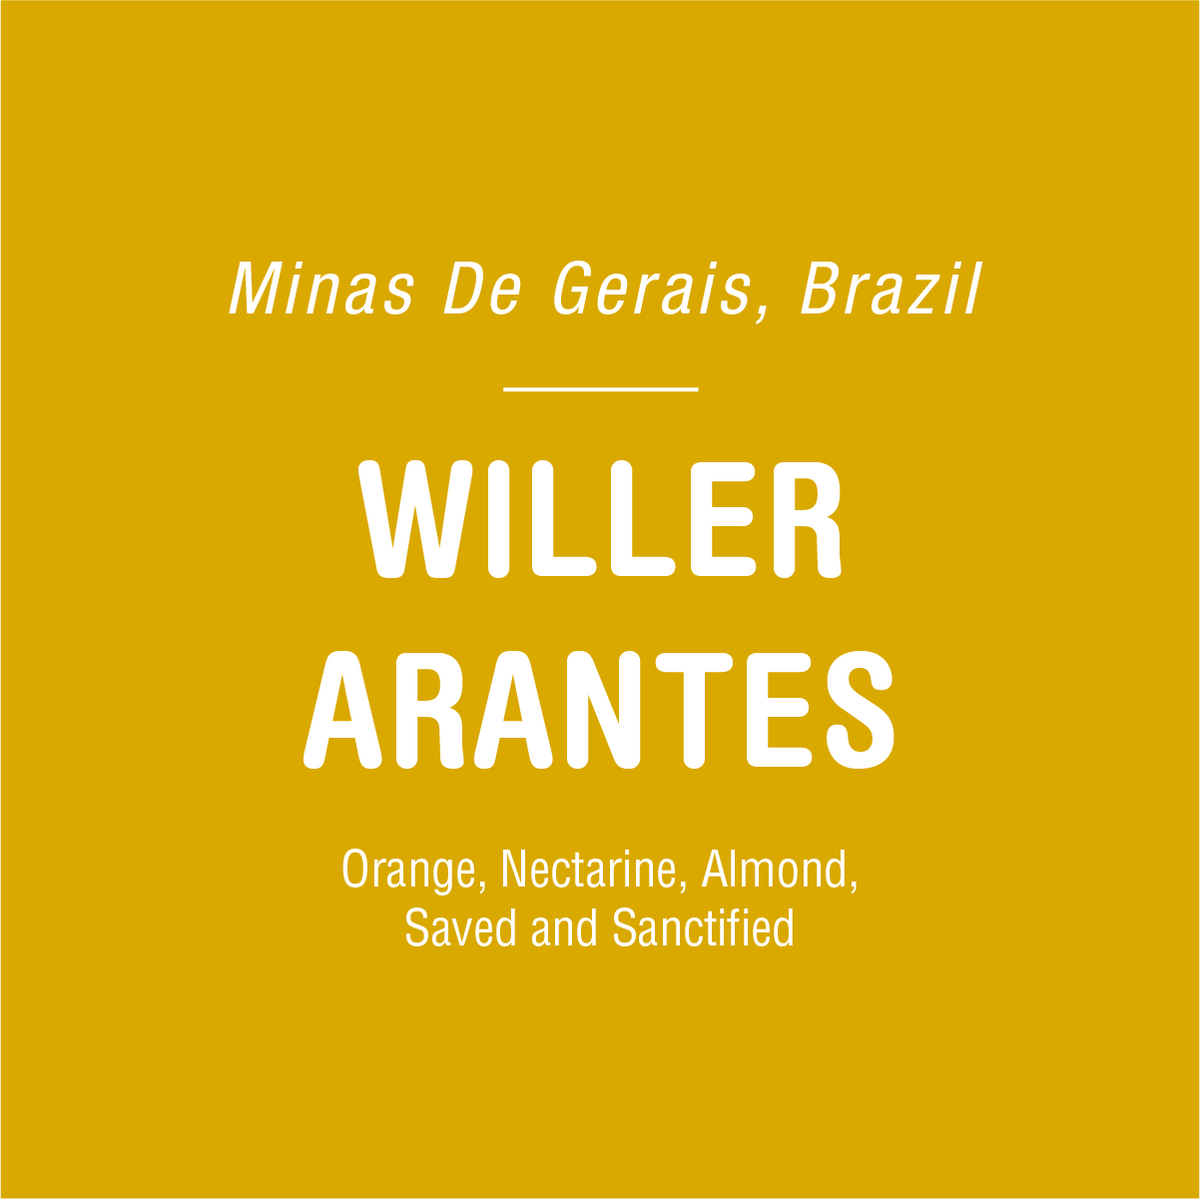 A yellow background features text that reads: "Minas De Gerais, Brazil" at the top, "Willer Arantes - Brazil" in the middle, and "Orange, Nectarine, Almond, Saved and Sanctified" at the bottom—representing flavors from this renowned specialty-grade coffee farm in Brazil by Tandem Coffee Roasters.